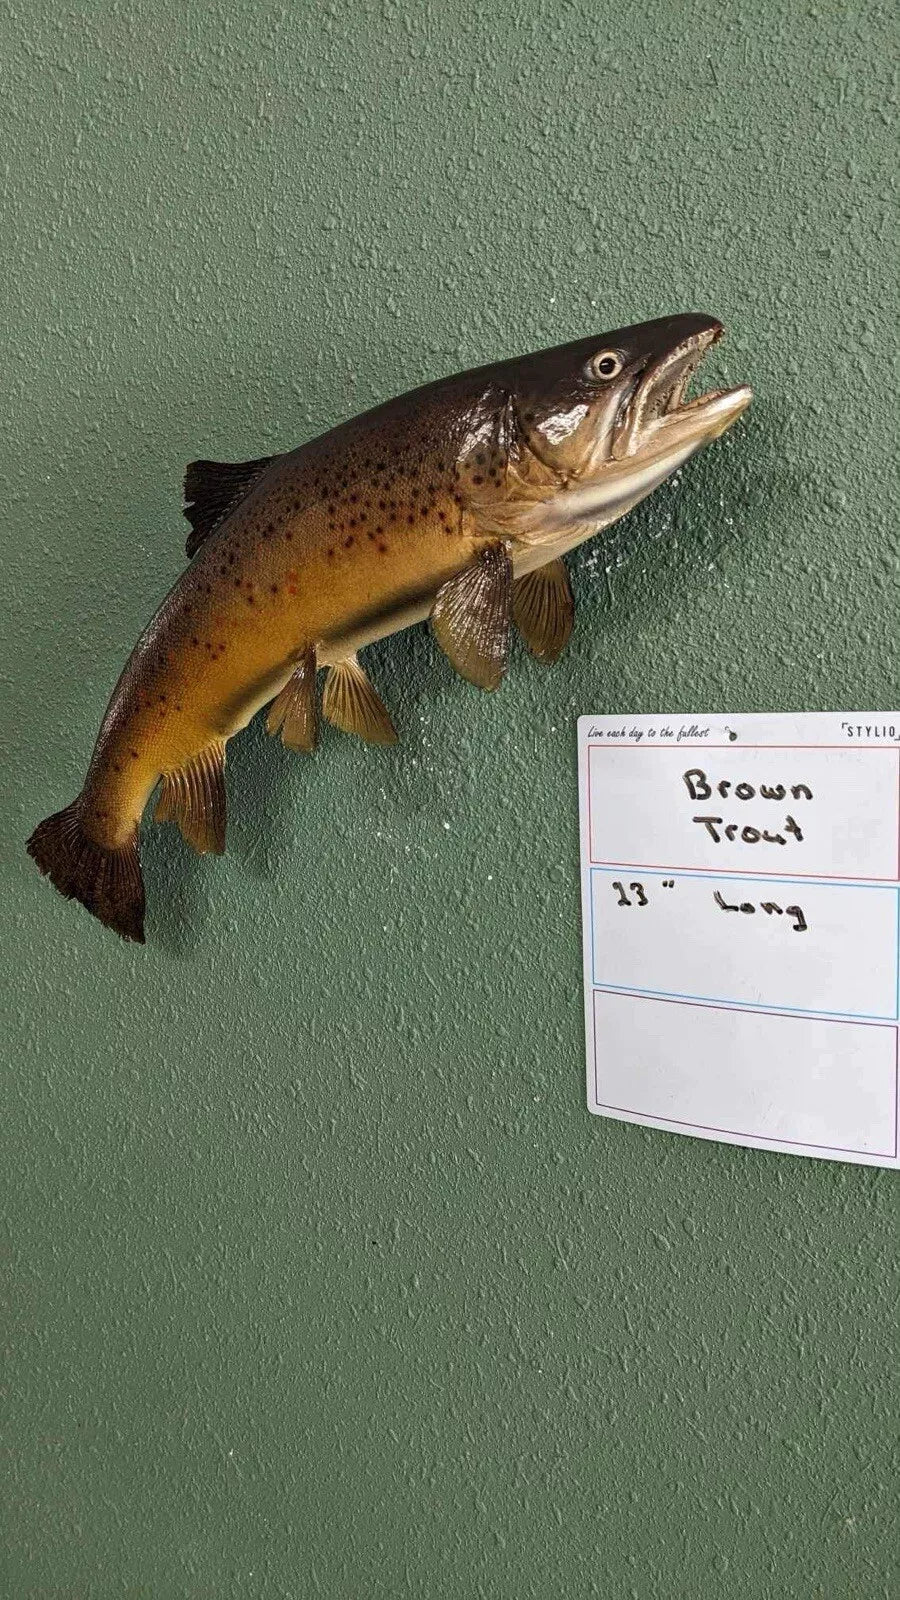 Beautiful Real Skin 23 inch Brown Trout Taxidermy Wall Mount